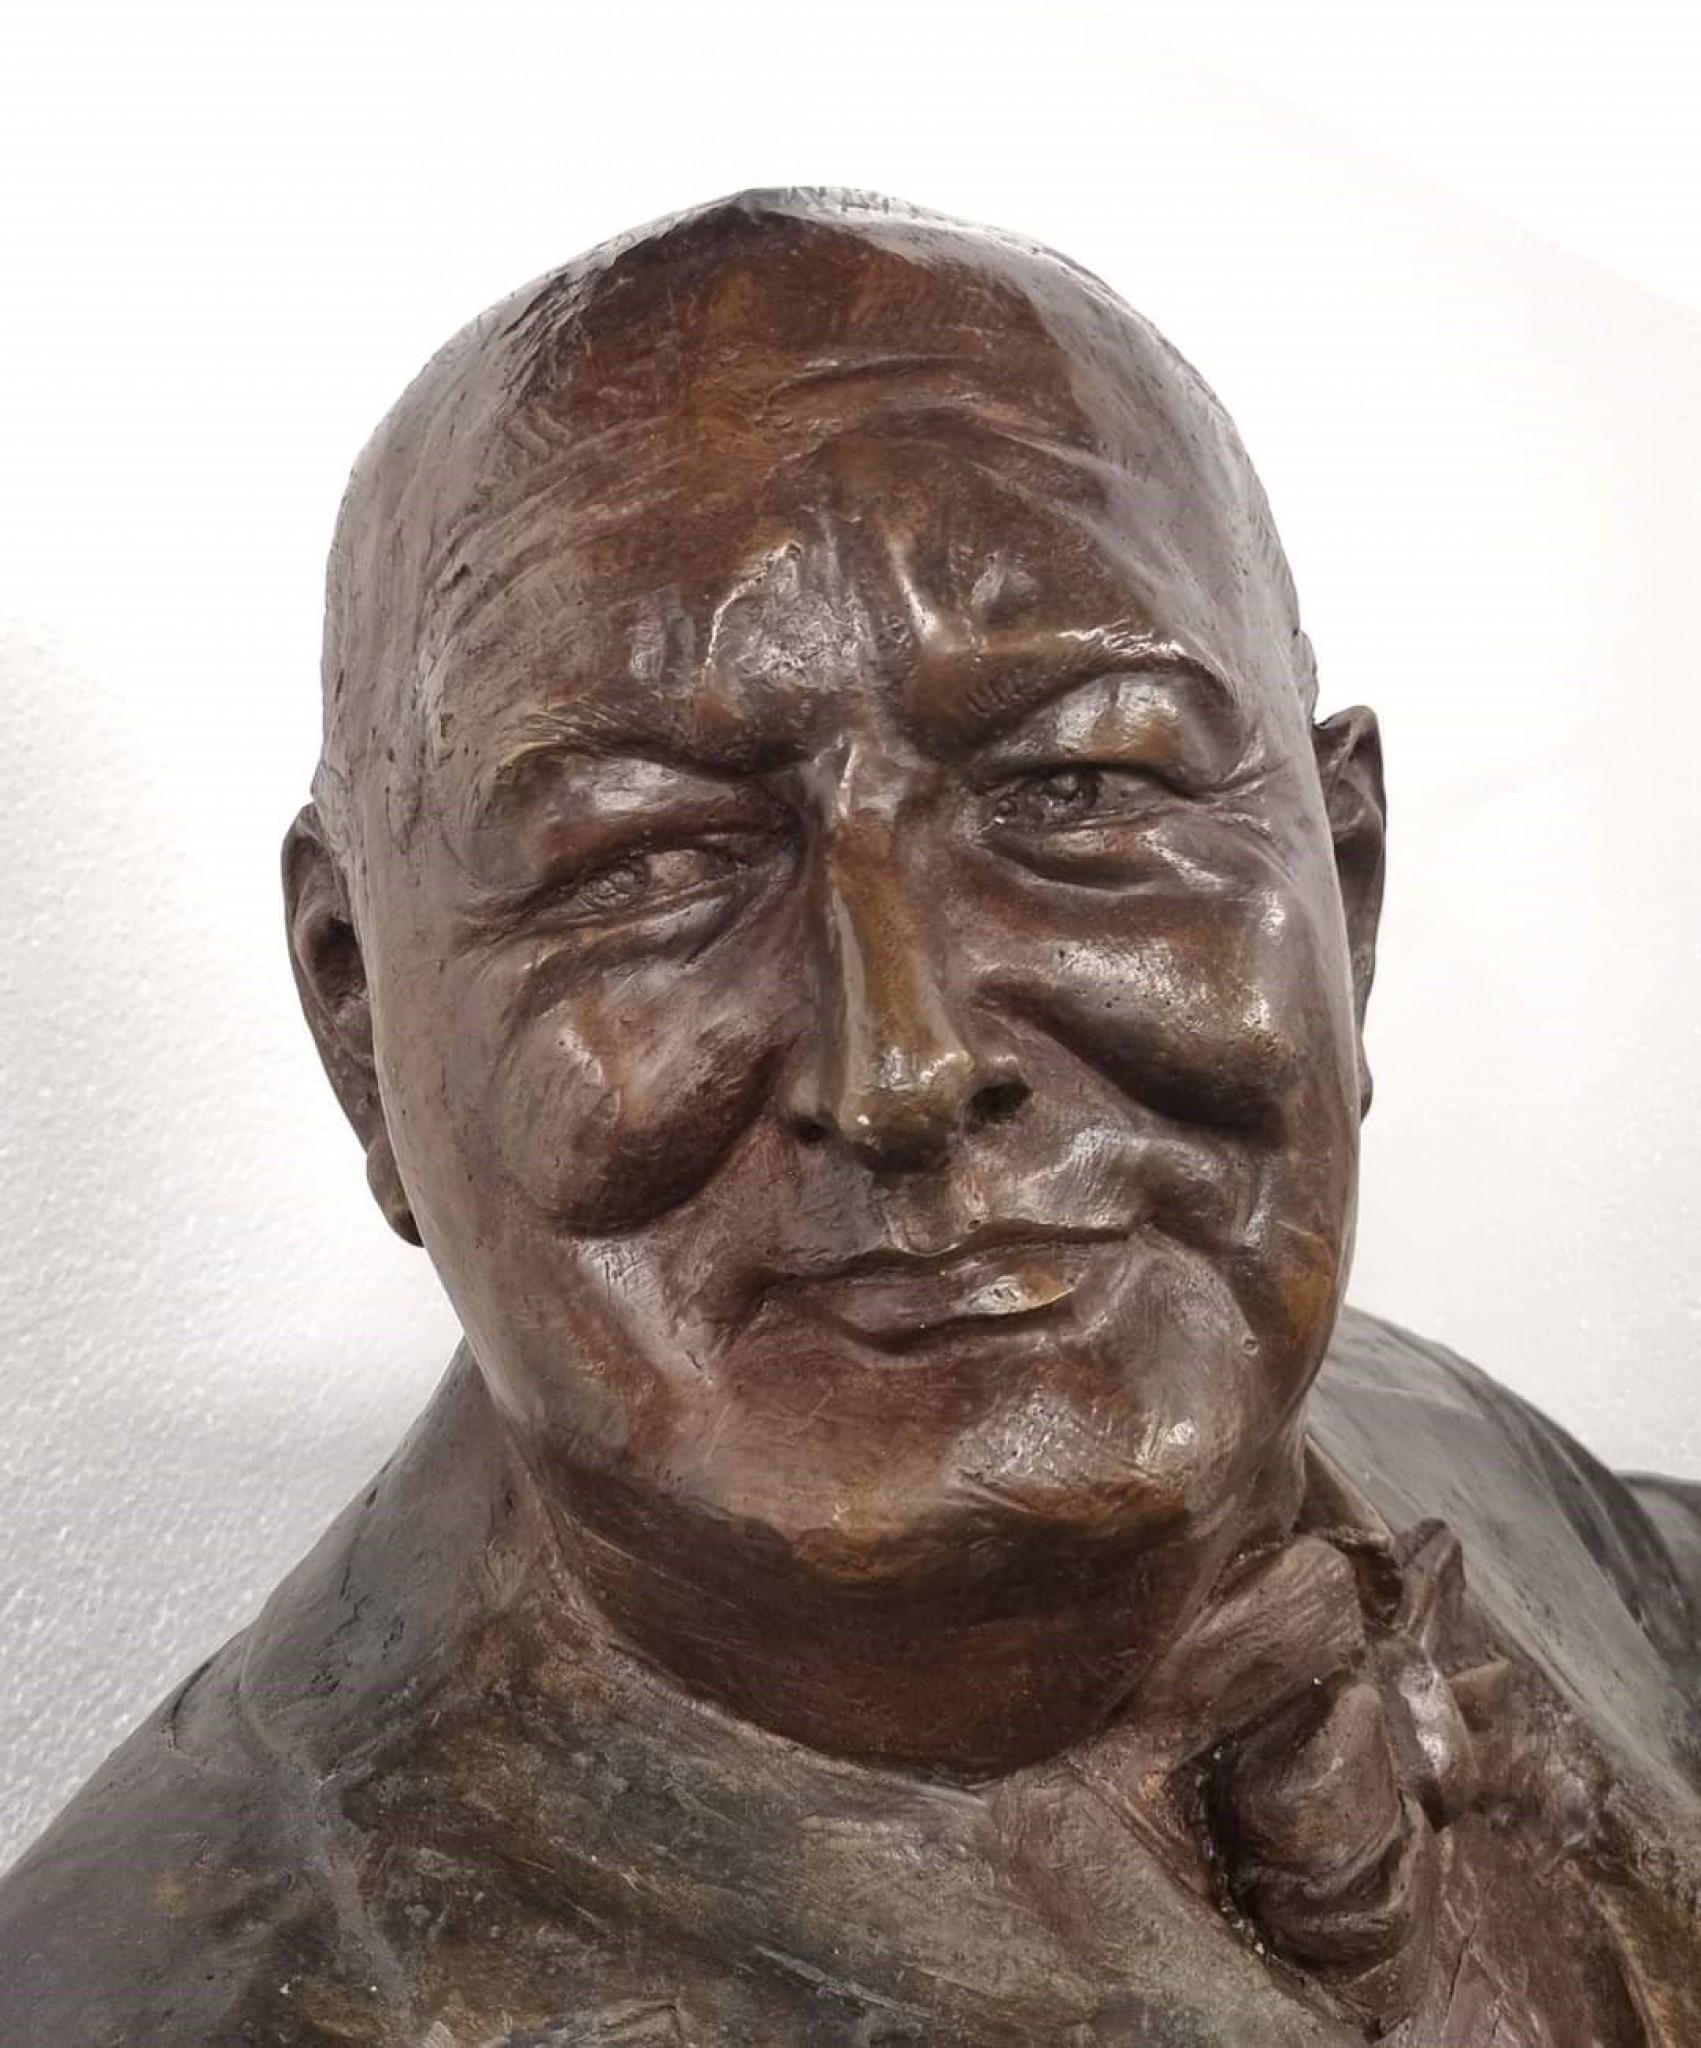 You are viewing a wonderful bronze casting of Sir Winston Churchill
Great size at almost five feet tall - 140CM
It's a classic Winston pose with his V for Victory sign whilst holding his trademark cigar
This is designed as a seated statue, so could